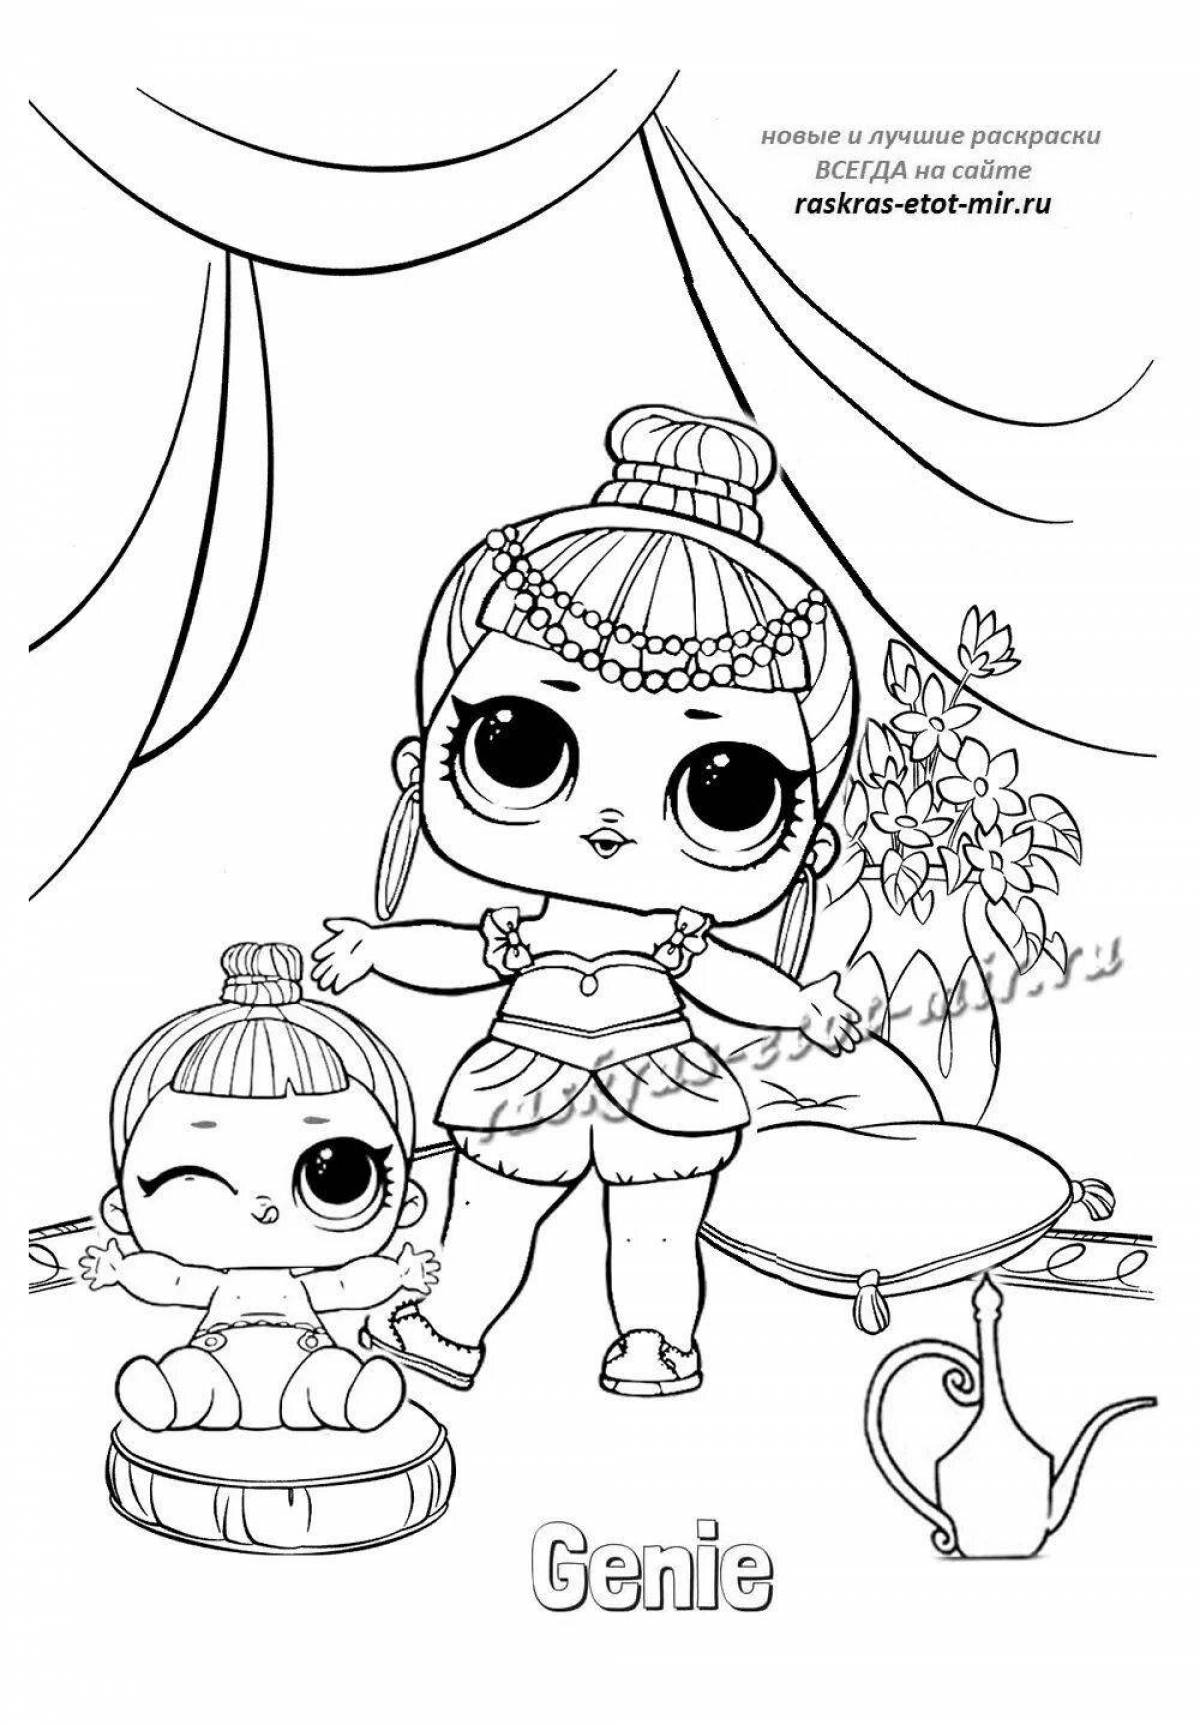 Vibrant lol dollhouse coloring page for girls